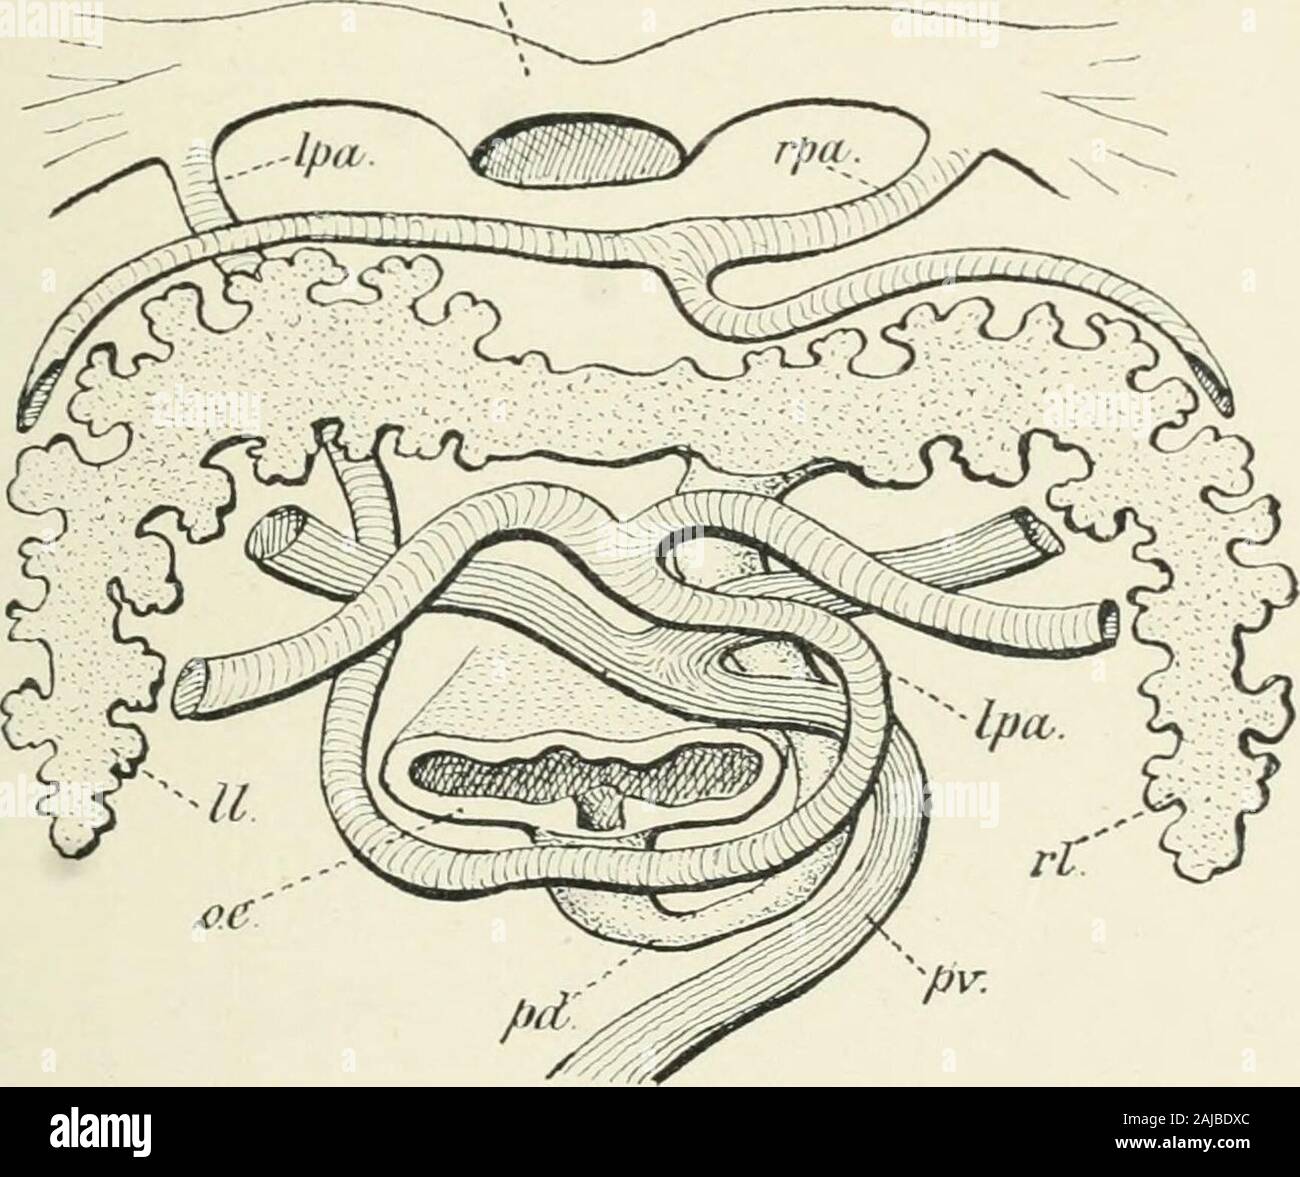 A treatise on zoology . lom. Thecommunicating ductus pneumaticus jmsses down the dorsalmesentery to open into the oesophagus. The ductus isshort, and the opening wide in the more primitive forms {Lepi-dosteus, Amia, Acipcnser). But although the bladder is dorsal inthe Actinopterygii, the opening of the ductus varies considerablyin position. In the Chondrostei, Amia, Lepidosteus, and themajority of the Teleostei, it is quite or nearly median and dorsal; AIR-BLADDER but in others, such as Salmo, the Siluridae, Cypriuodontidae, Per-copsidae, and Galaxiidae, it opens more or less on the right. Ont Stock Photo